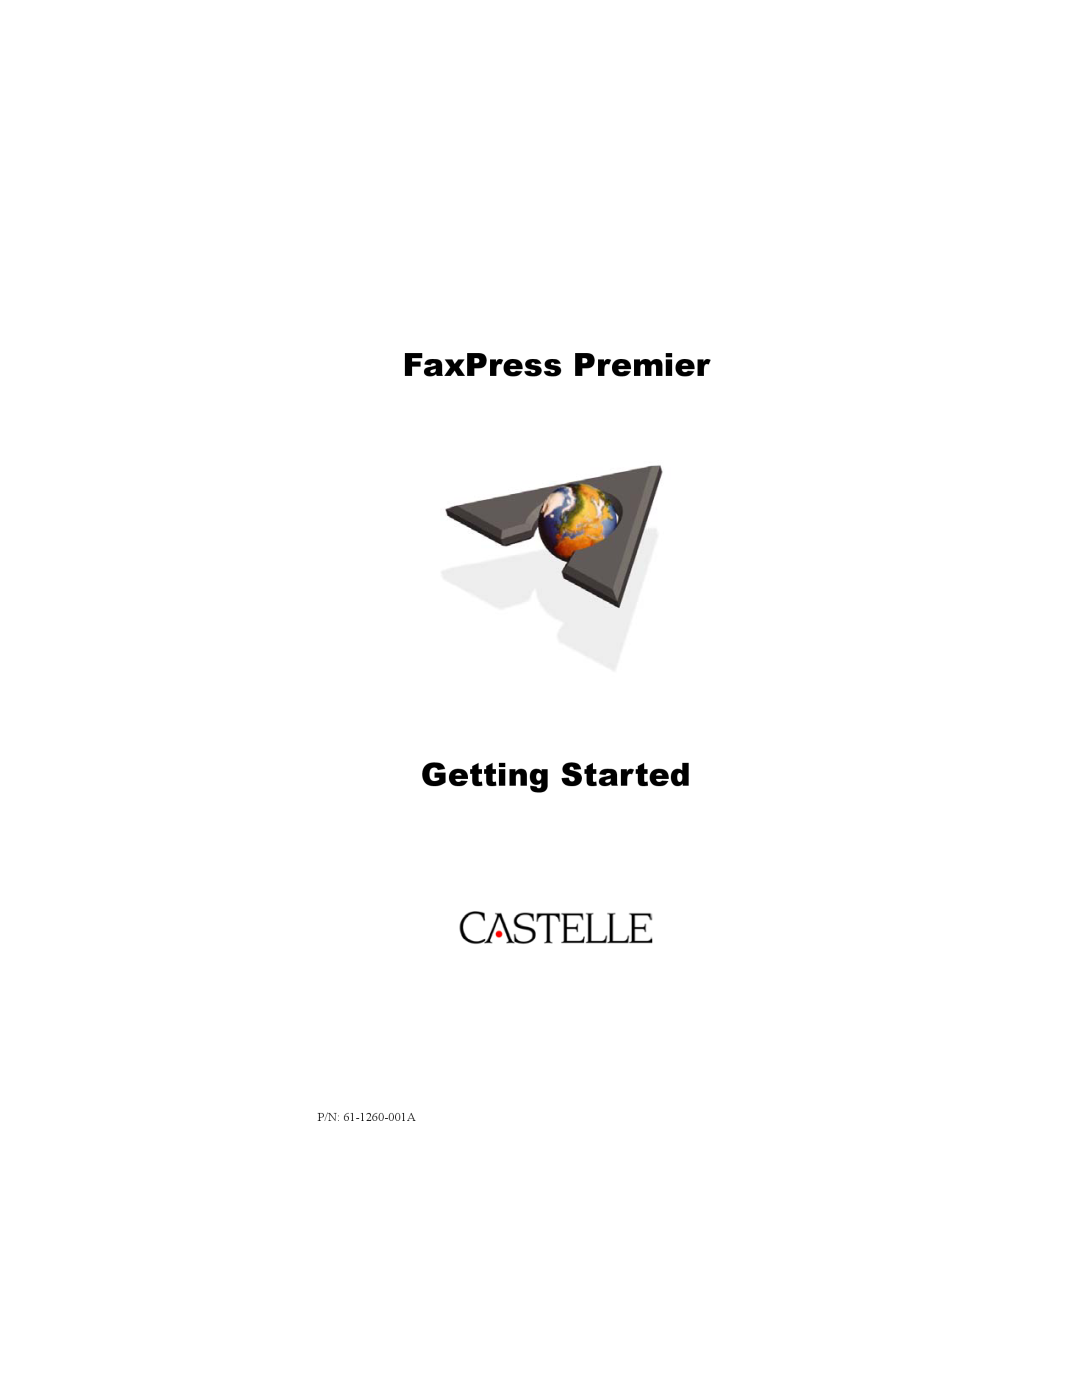 Castelle manual FaxPress Premier, Getting Started, P/N 61-1260-001A 